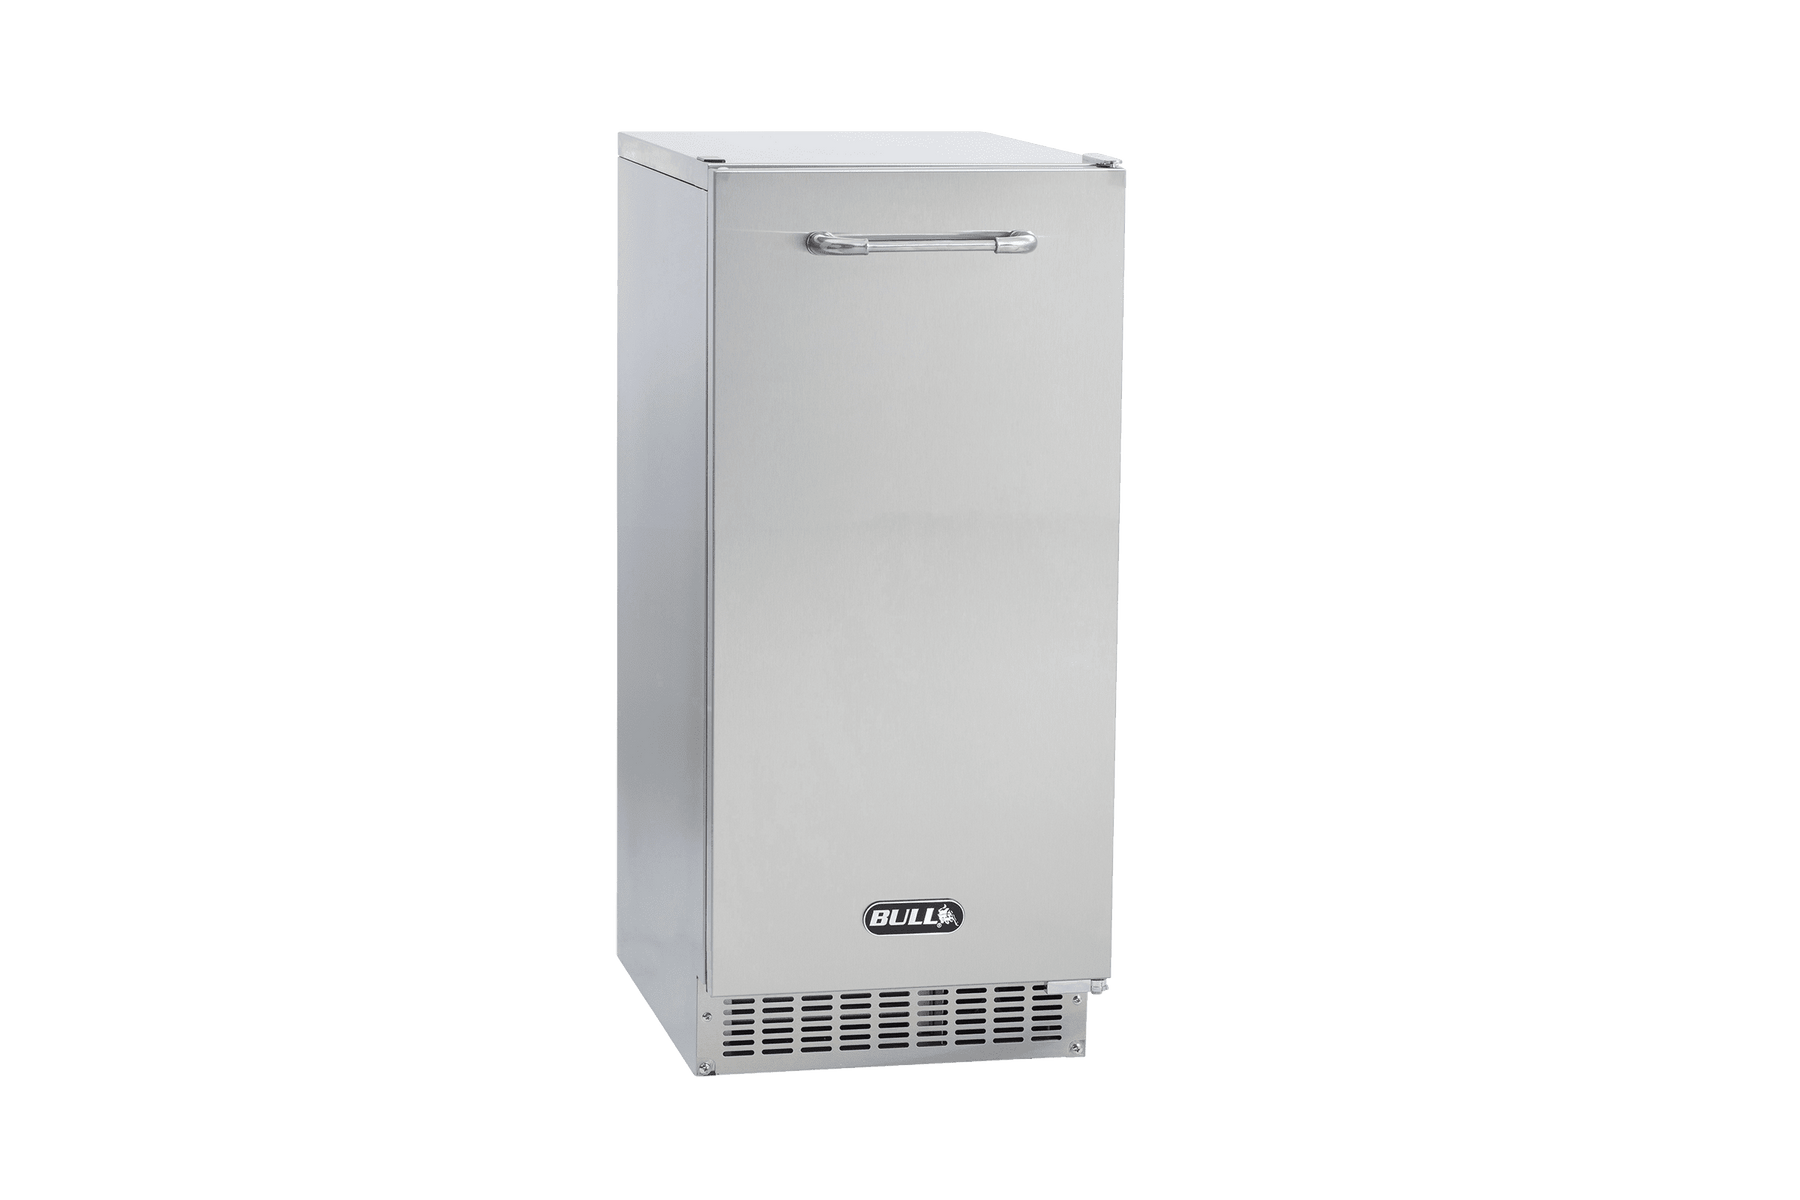 Whynter (IDC-221SC) Countertop Direct Connection Ice Maker and Water  Dispenser 